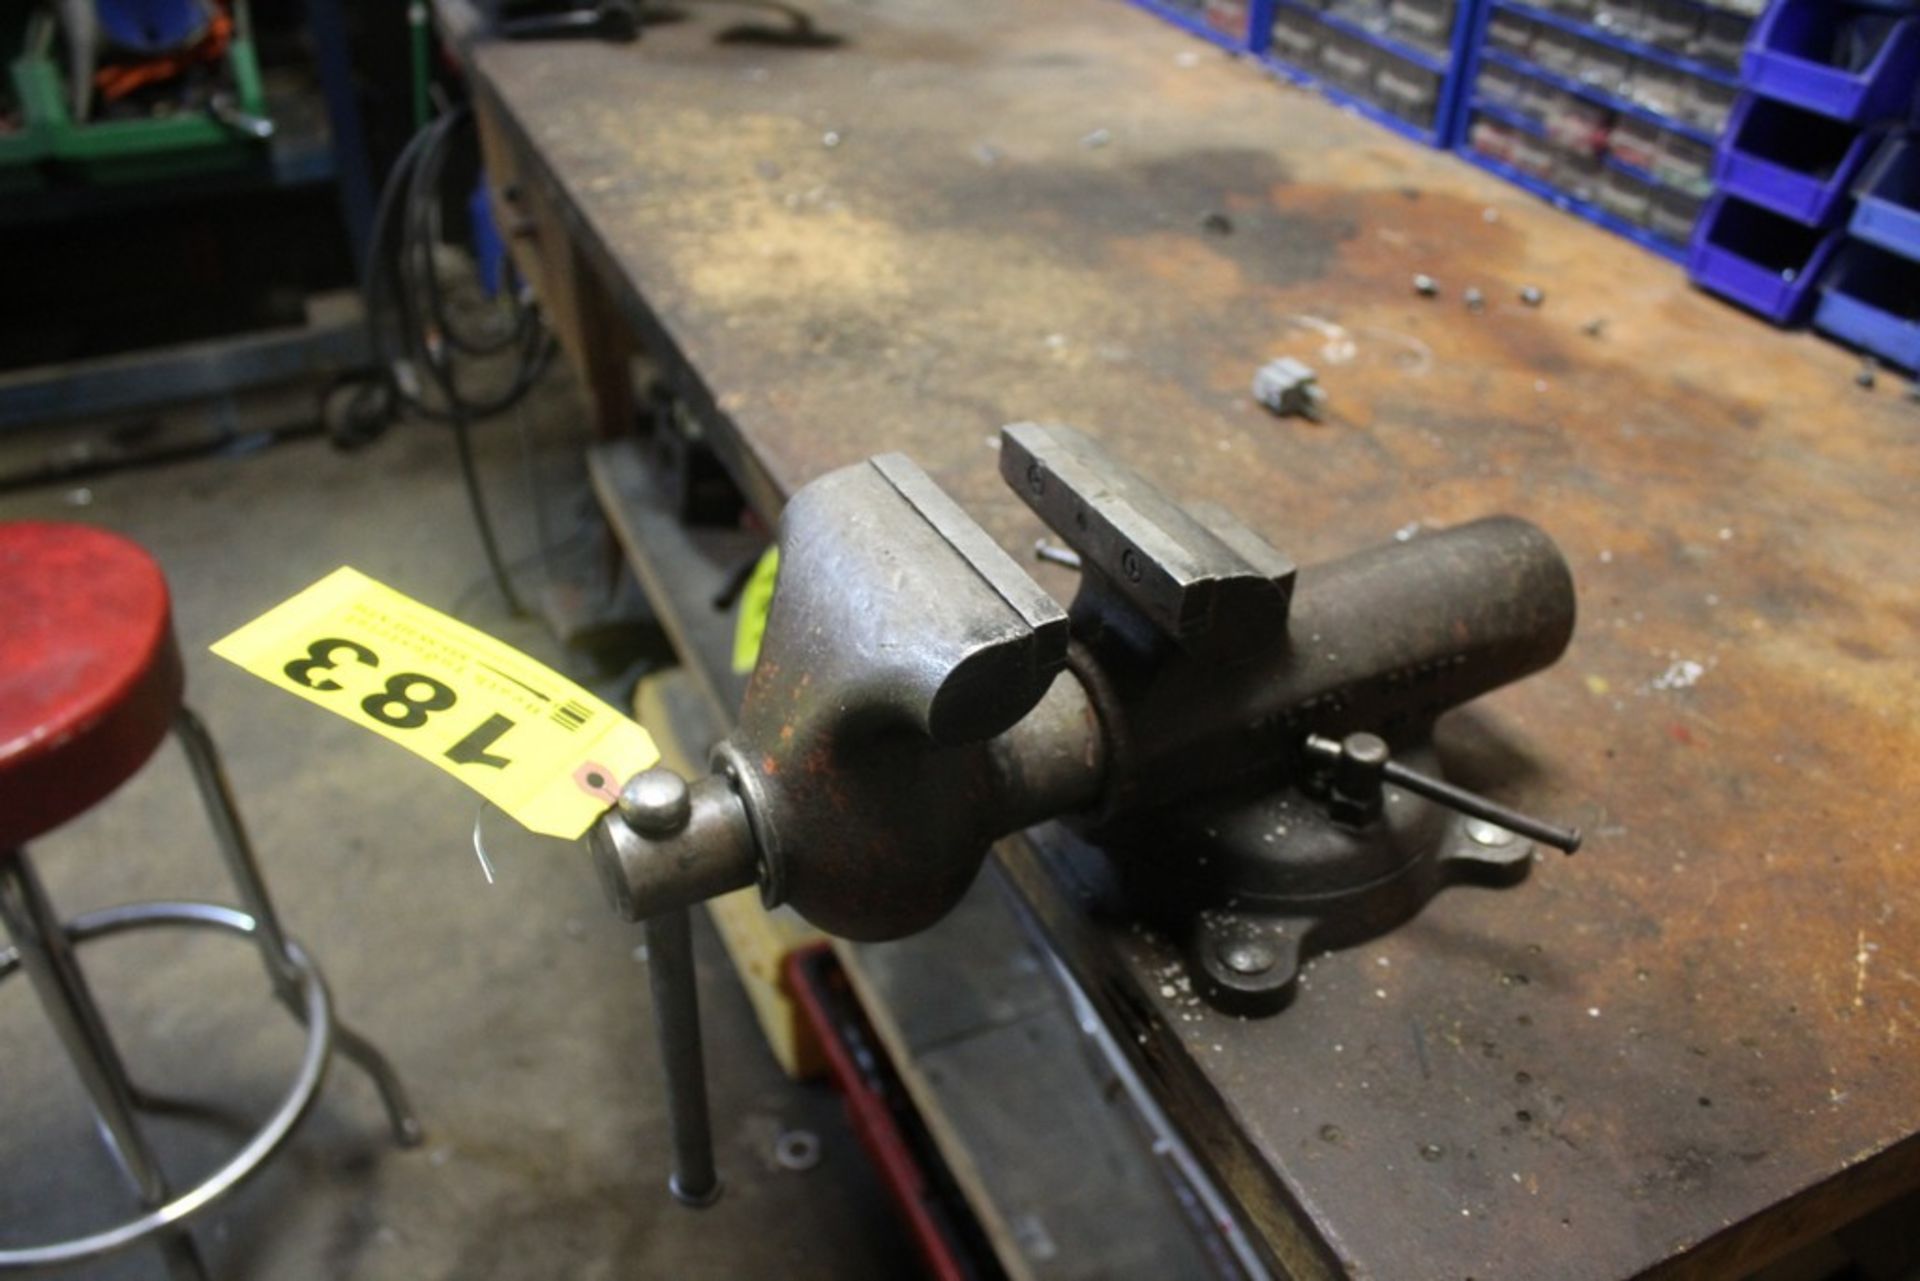 WILTON 4-1/2" BULLET VISE, MISSING END CAP, WITH WORK BENCH, 75" X 36" X 37" - Image 2 of 2